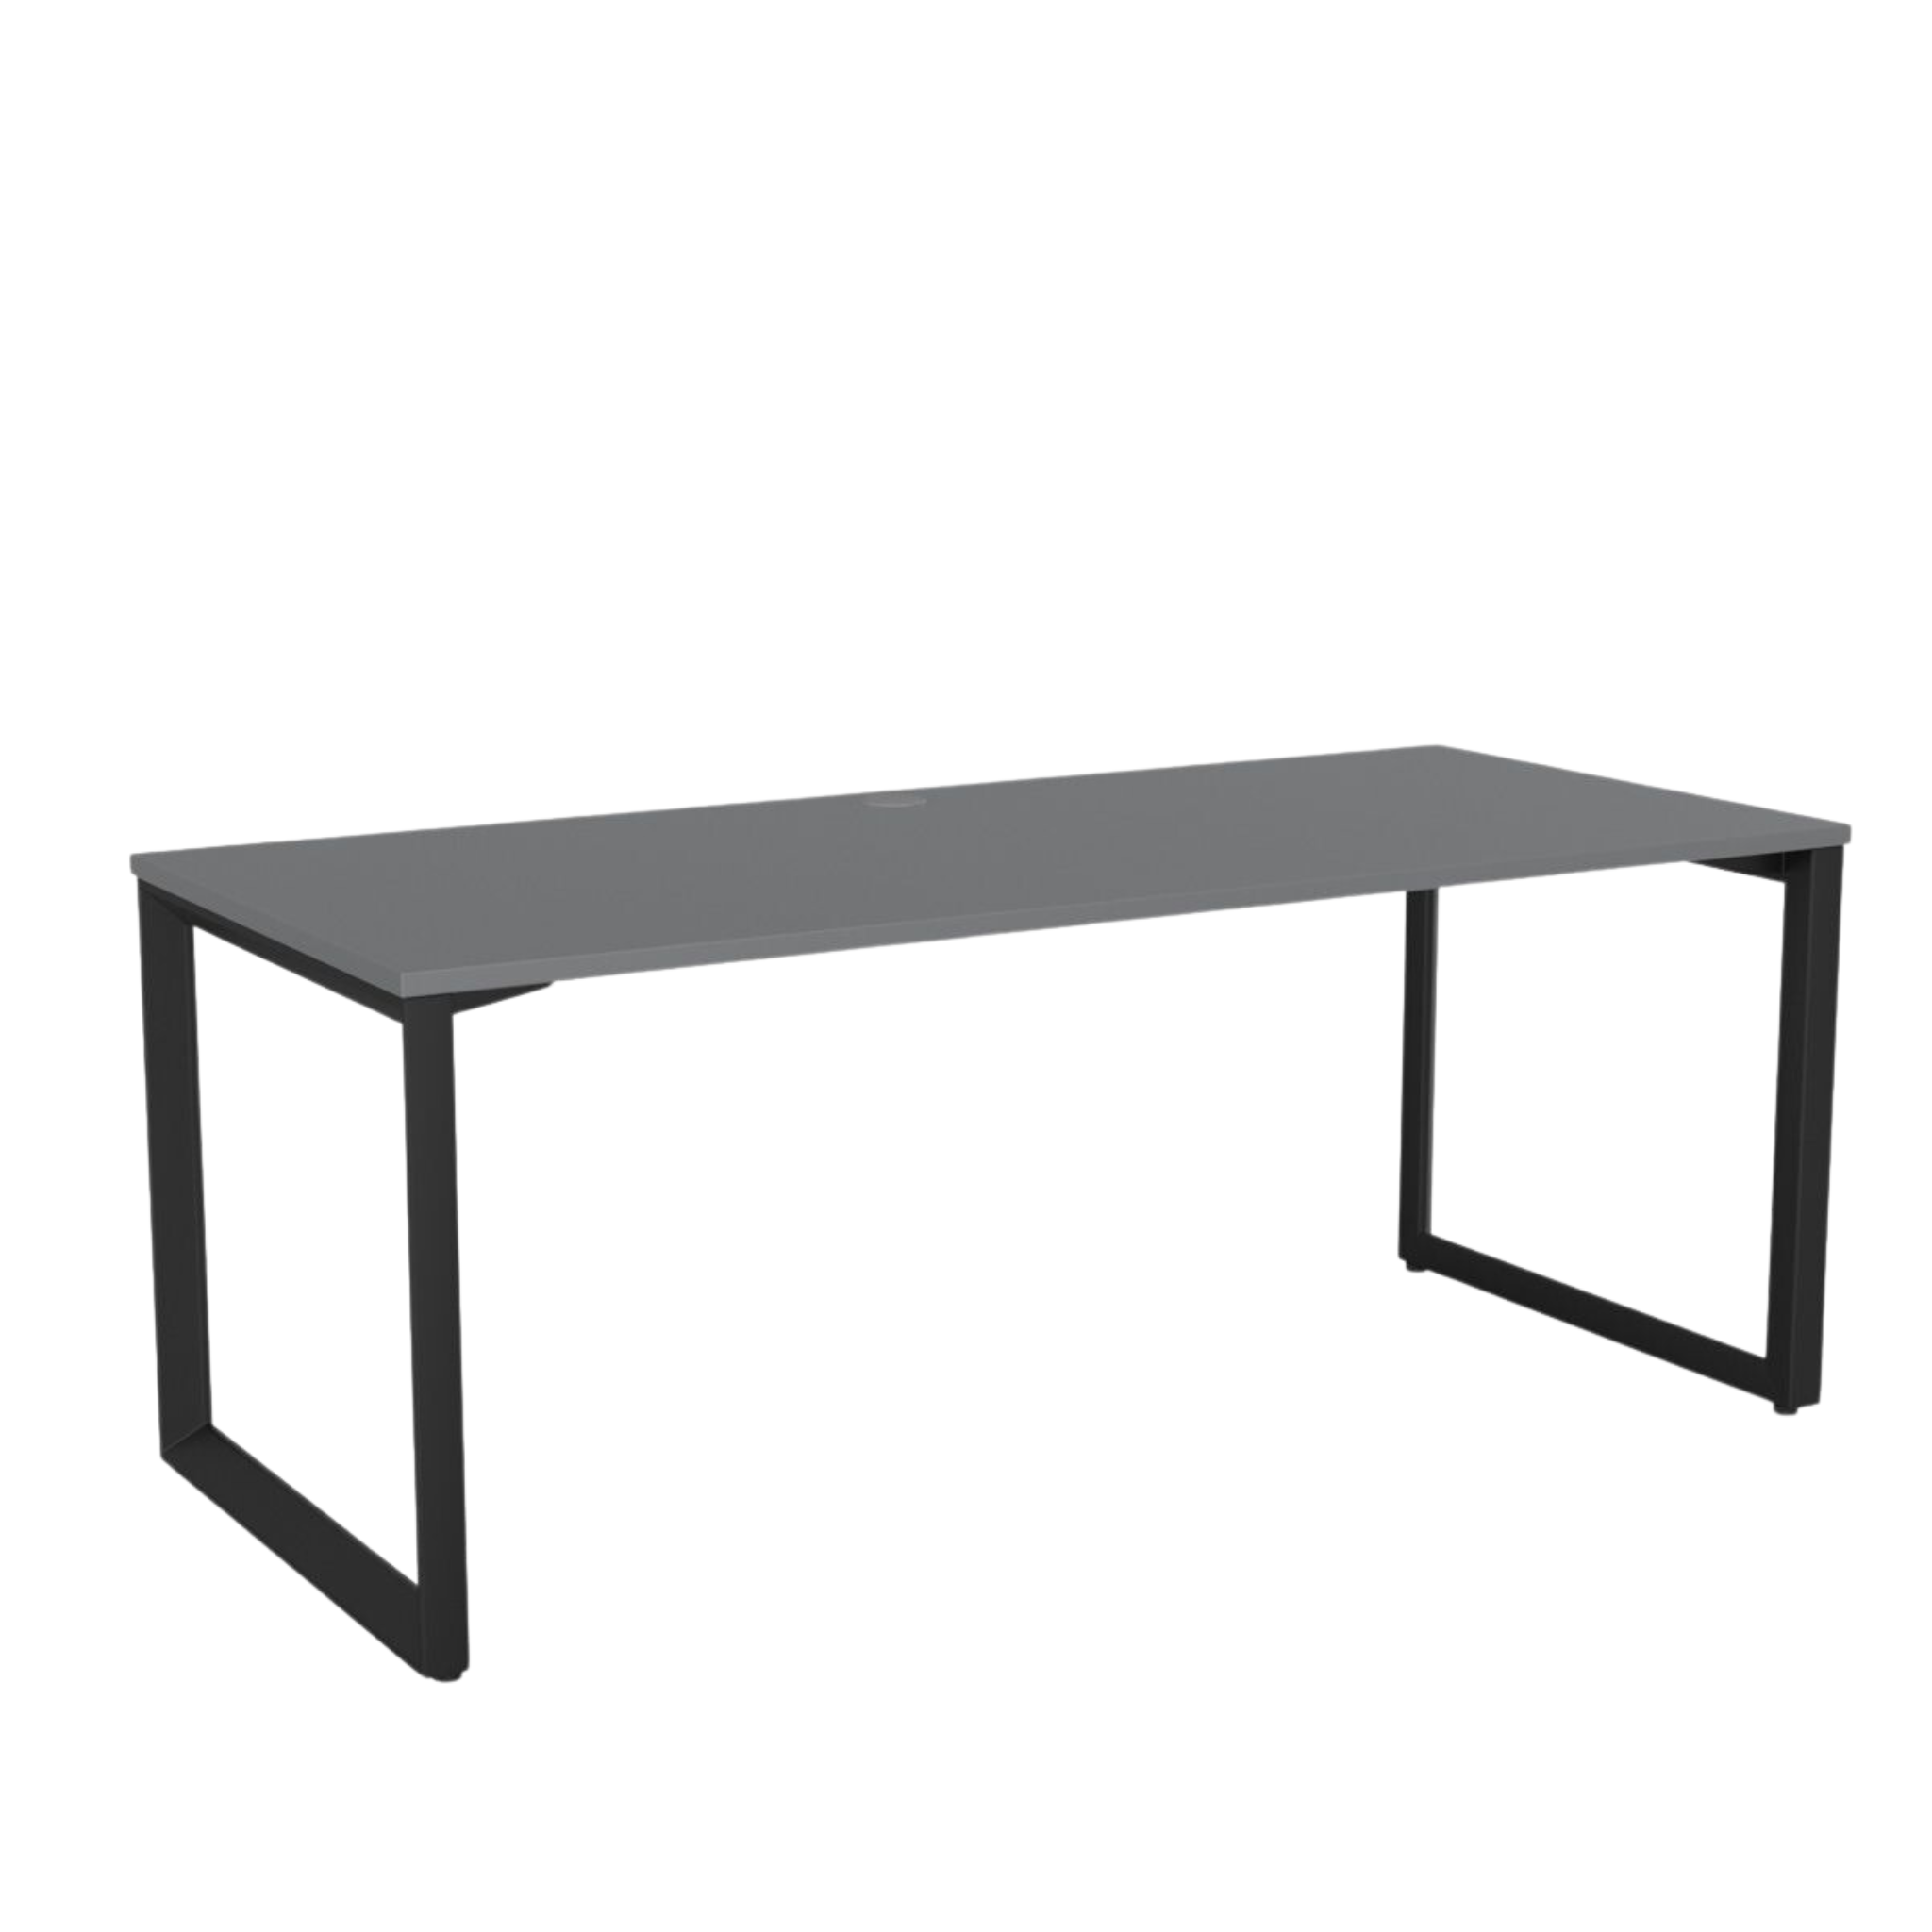 Anvil fixed height desk with black metal frame and silver melteca top